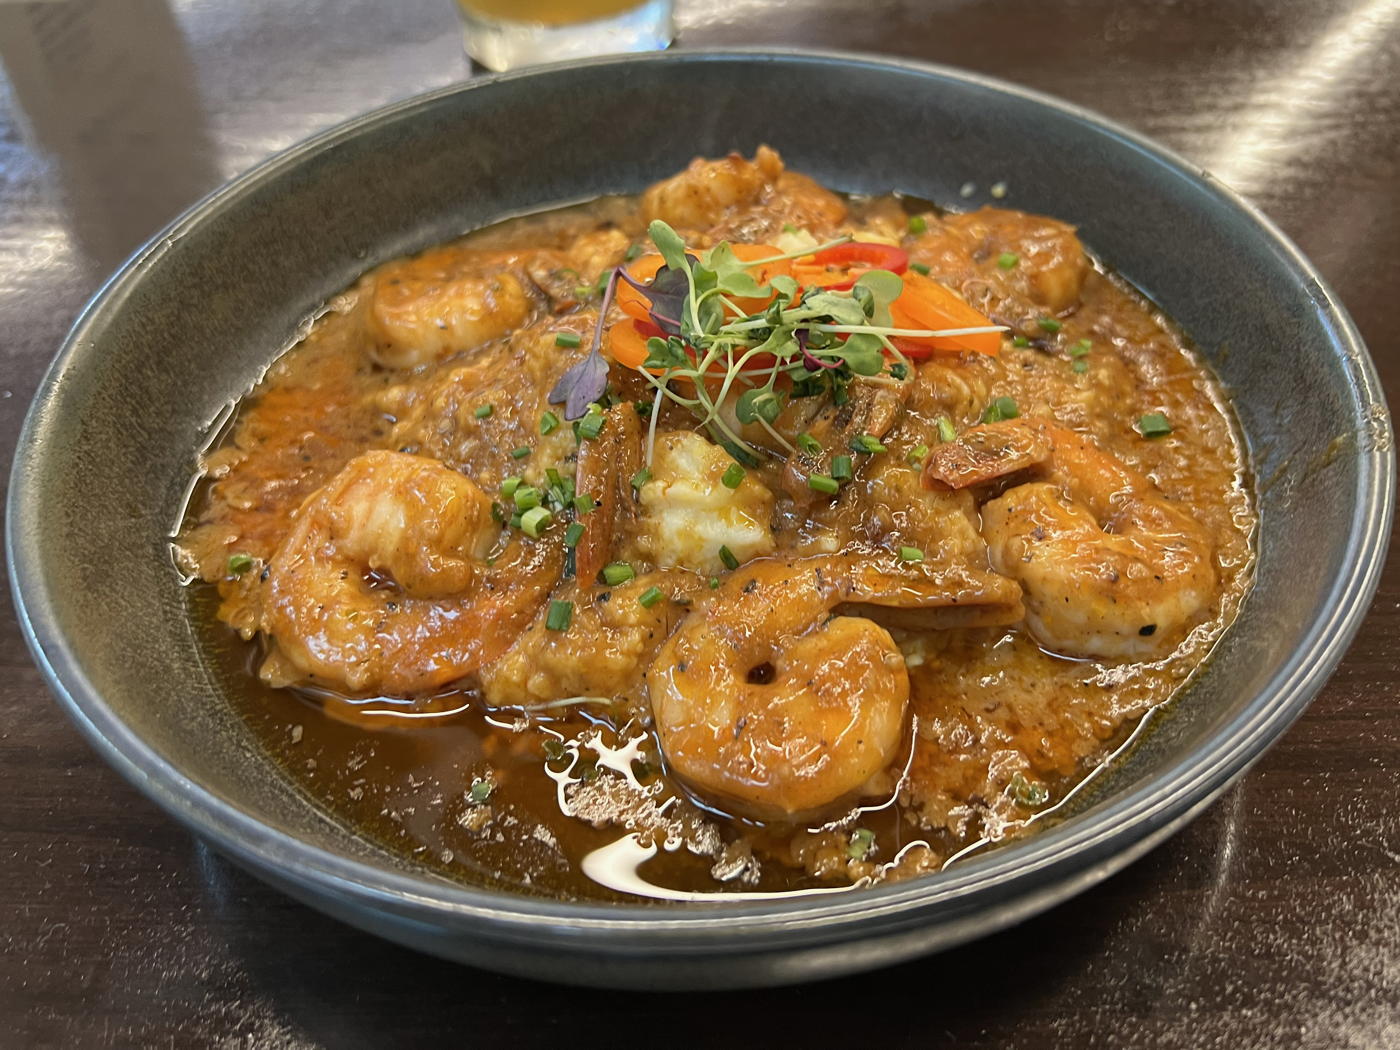 American Sector Shrimp and Grits: Shrimp and grits at the American Sector Bar and Grill in the National World War II Museum of New Orleans.; restaurants; New Orleans; shrimp; grits